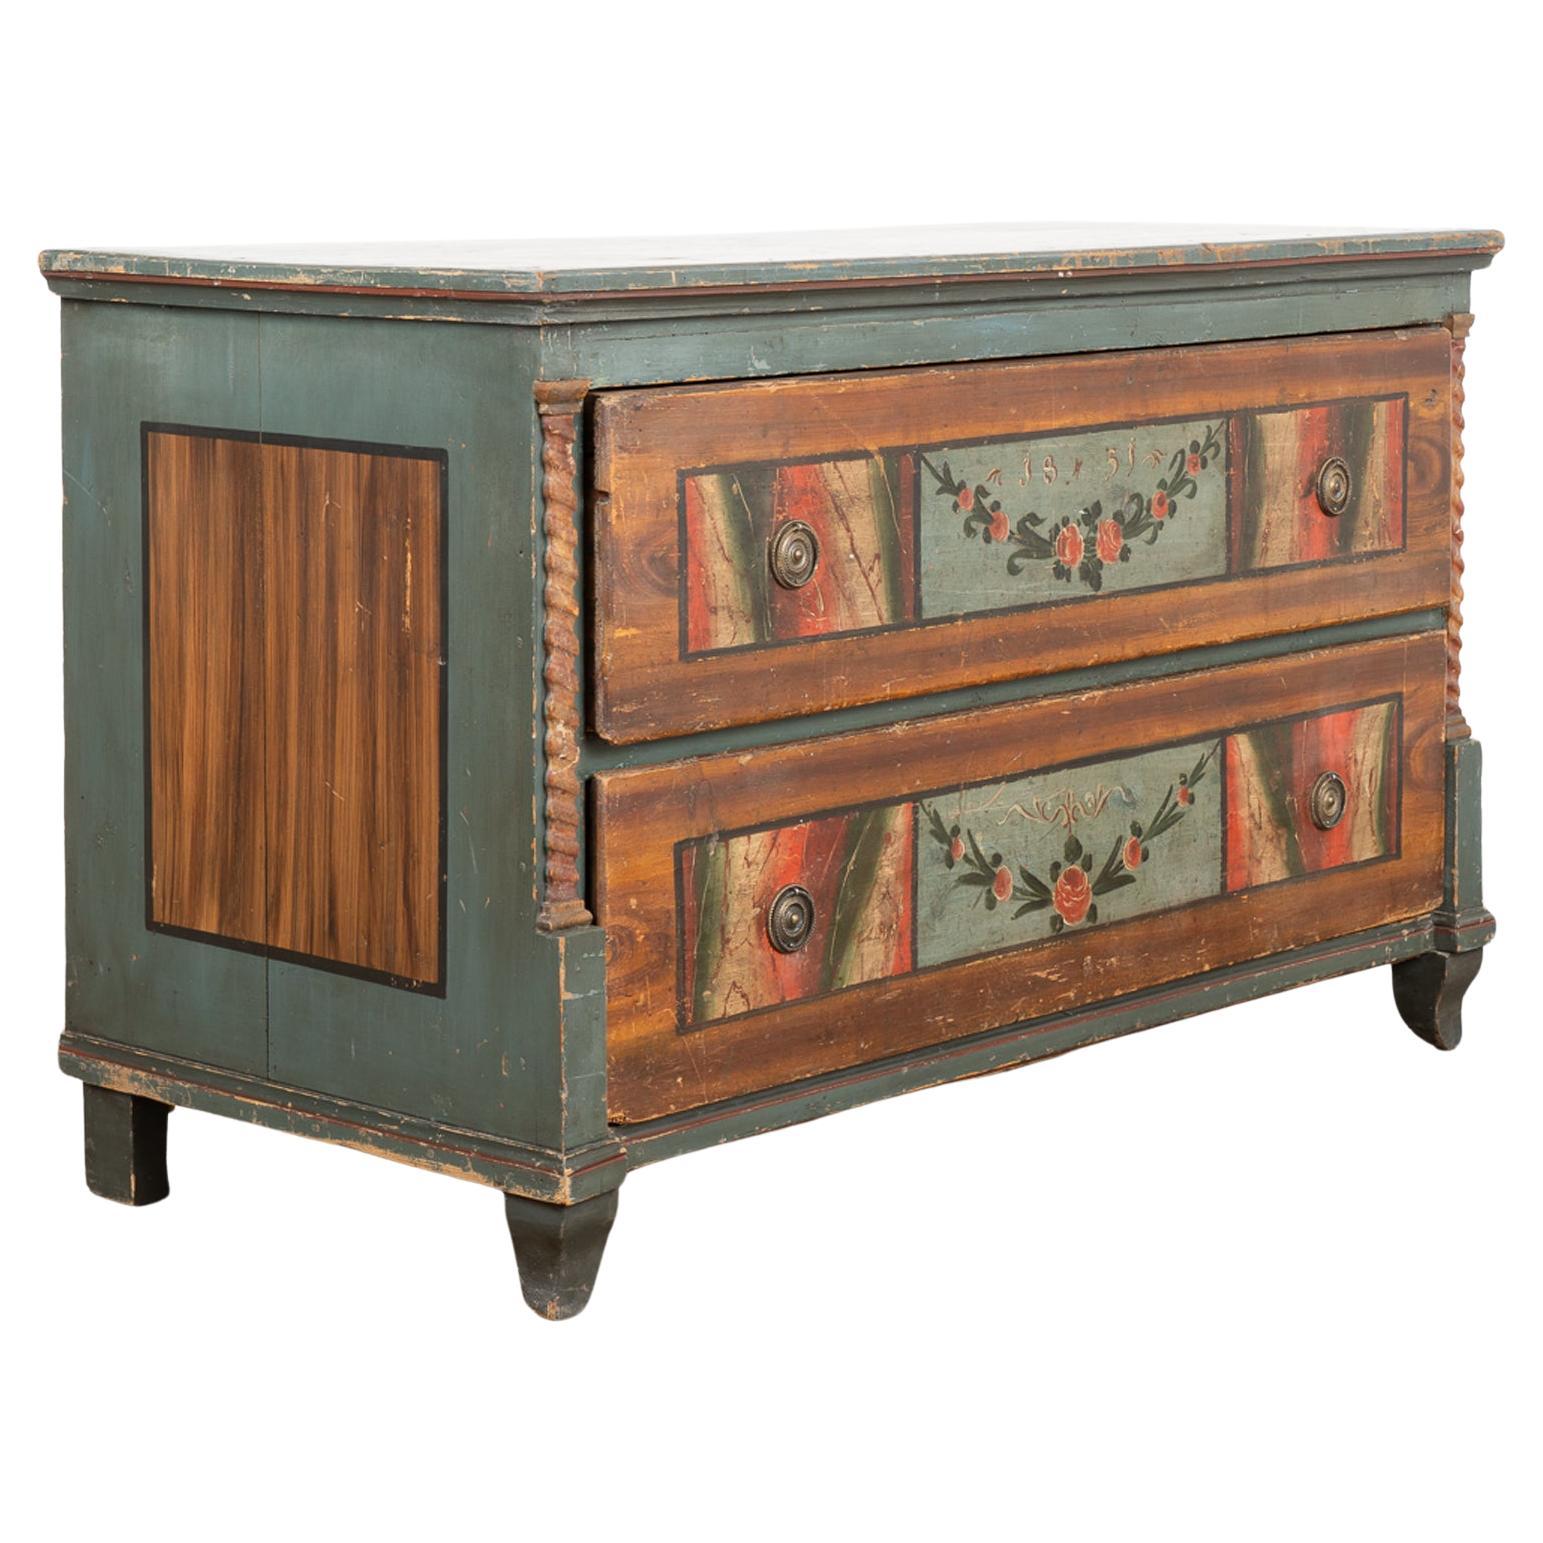 Original Painted Blanket Chest of Two Drawers, Hungary dated 1851